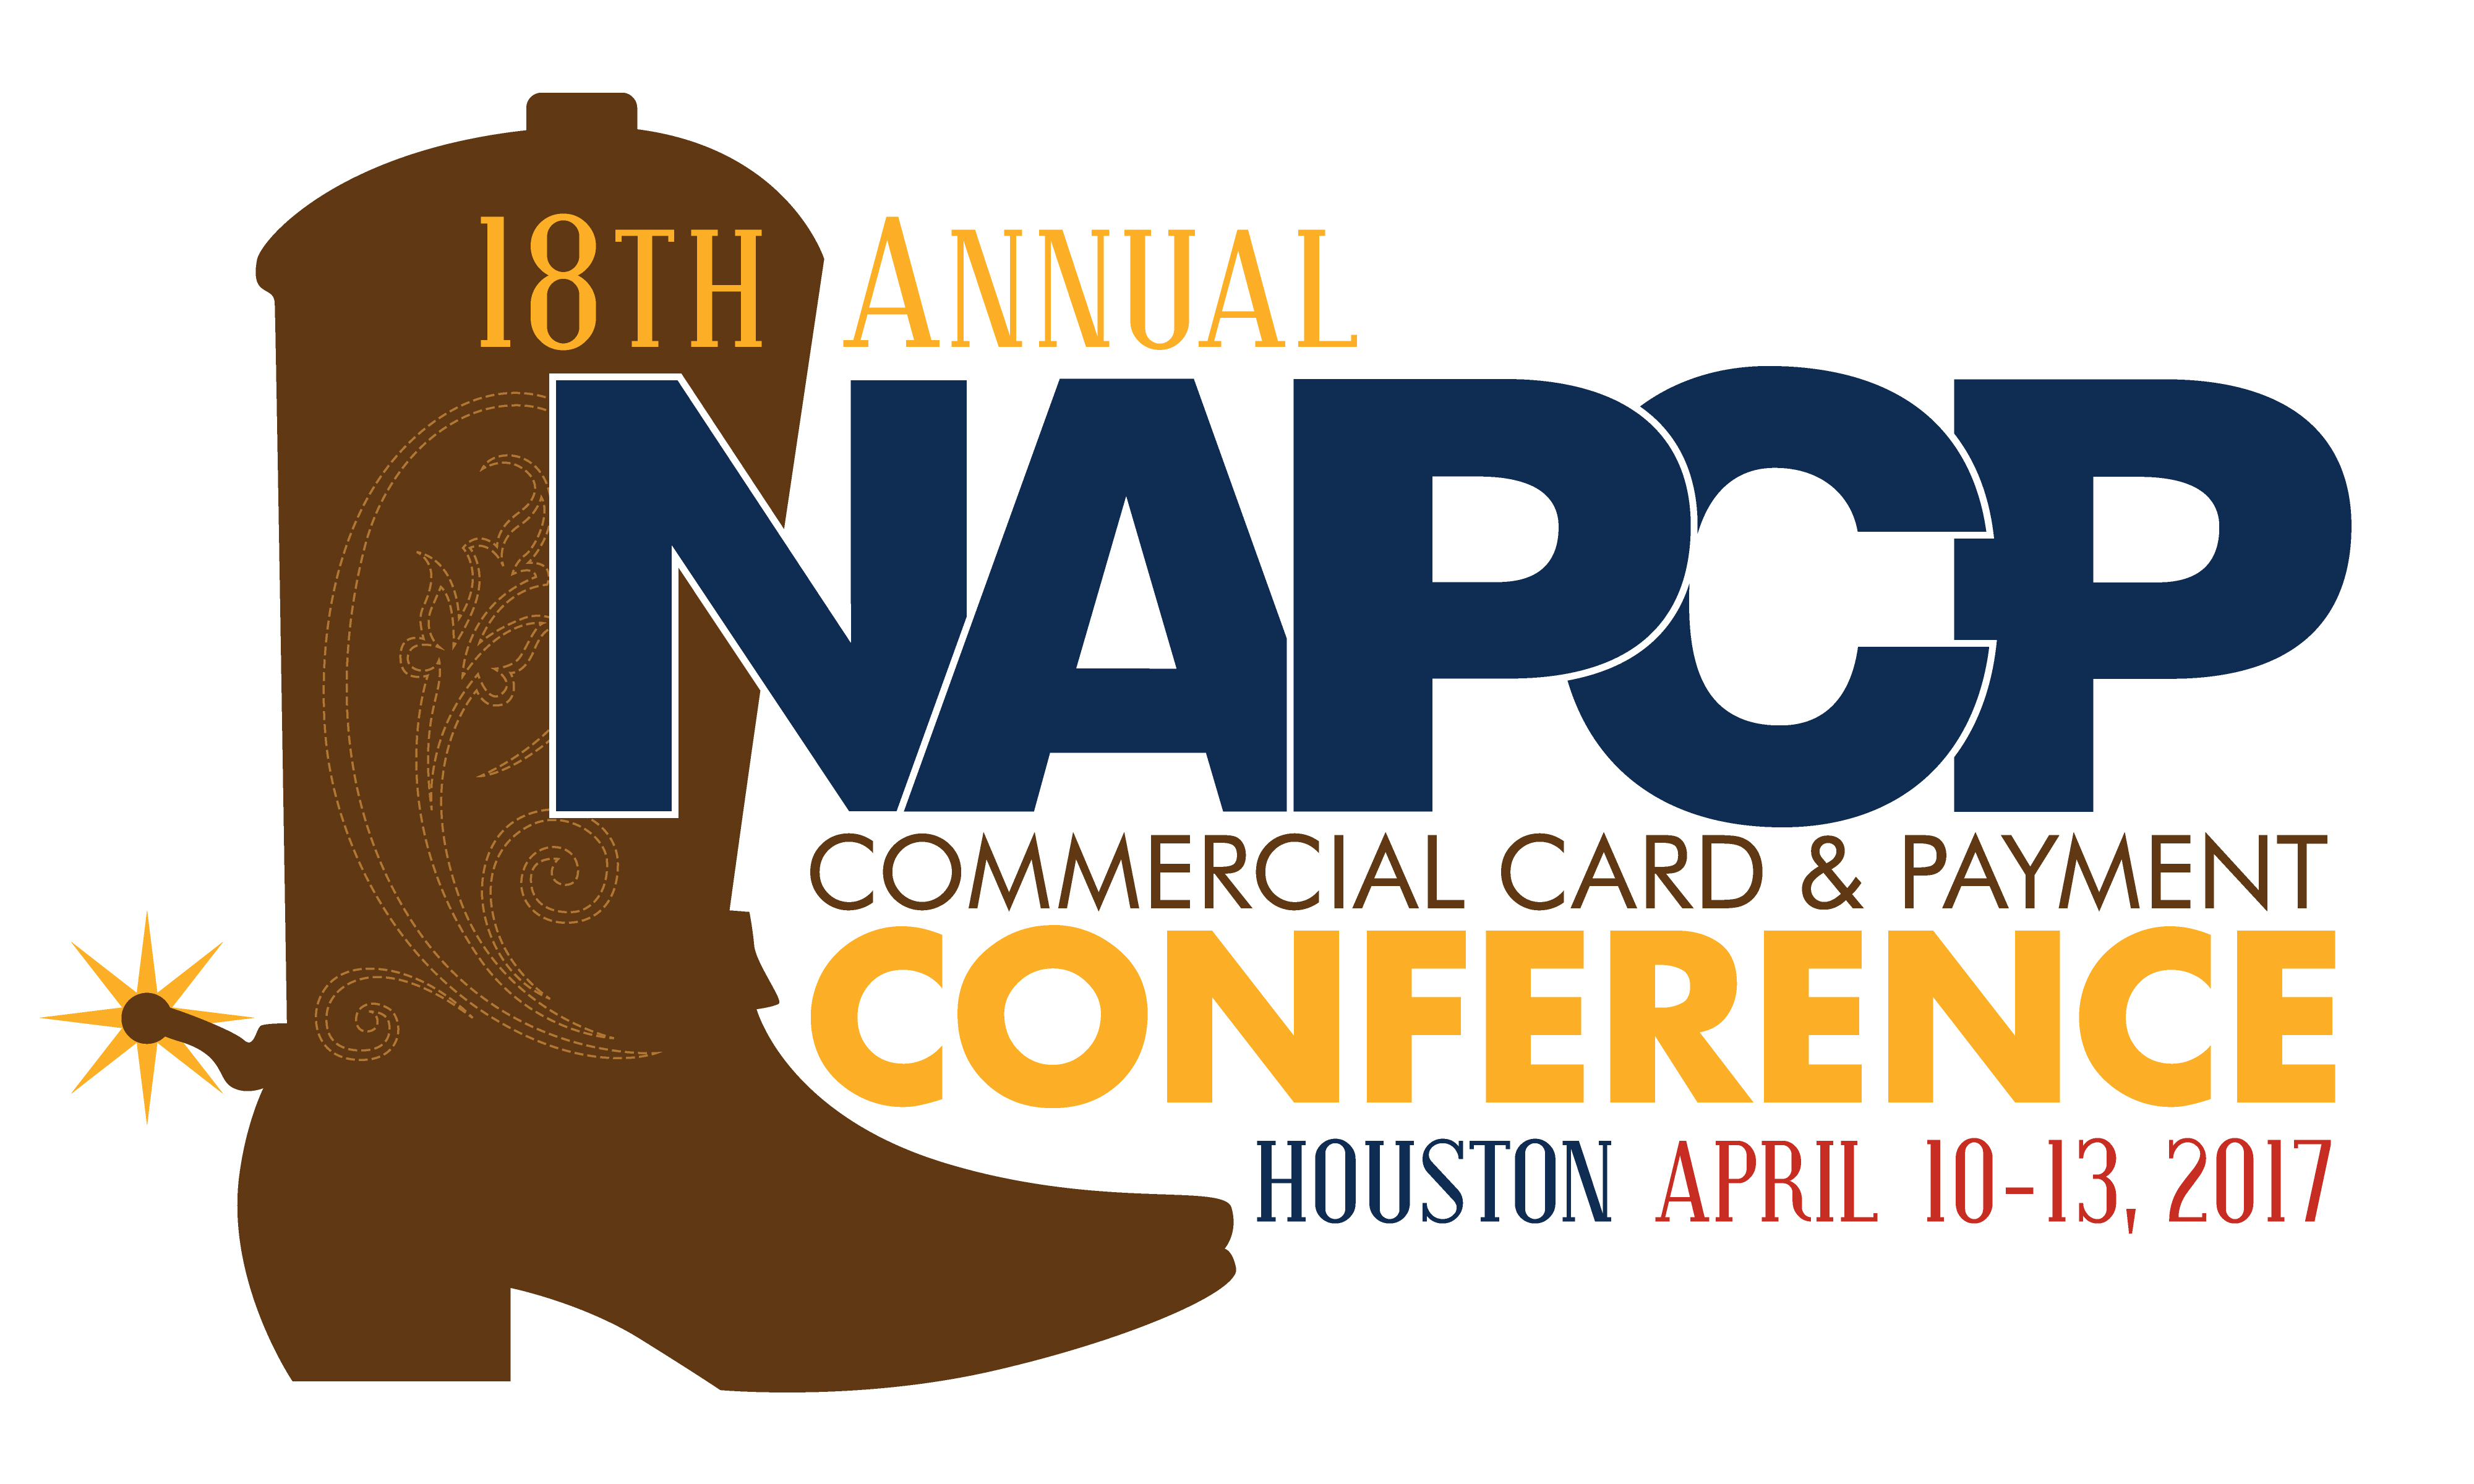 NAPCP Seeking Commercial Card and Payment Professionals to Speak at